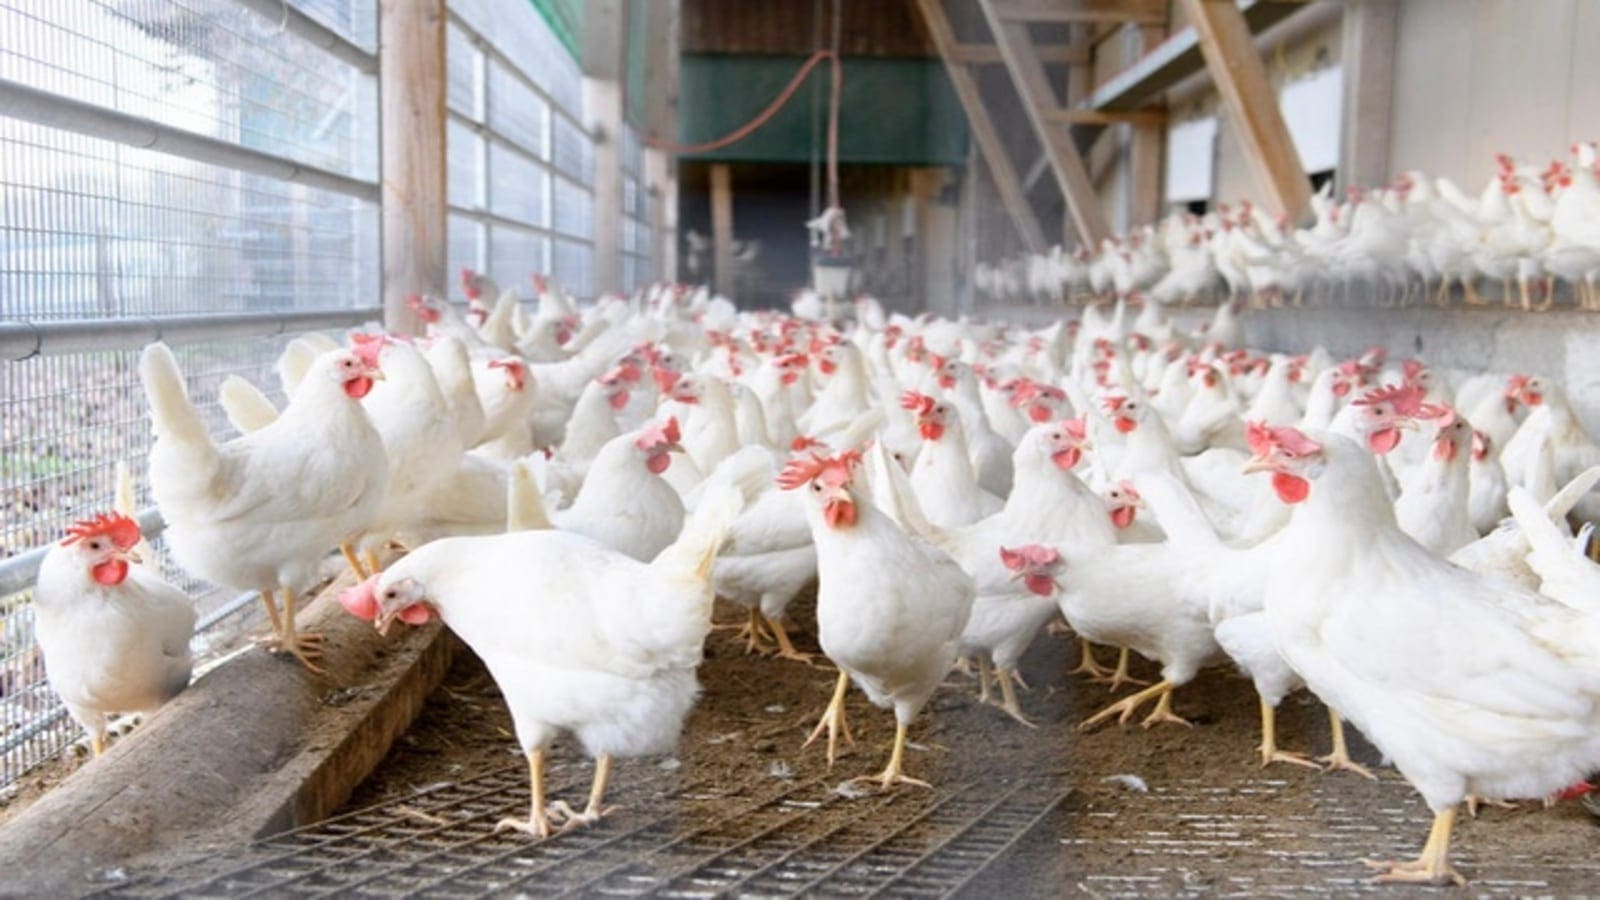 Mozambique authorizes importation of poultry from Brazil, Turkey amid Avian Flu epidemic in South Africa